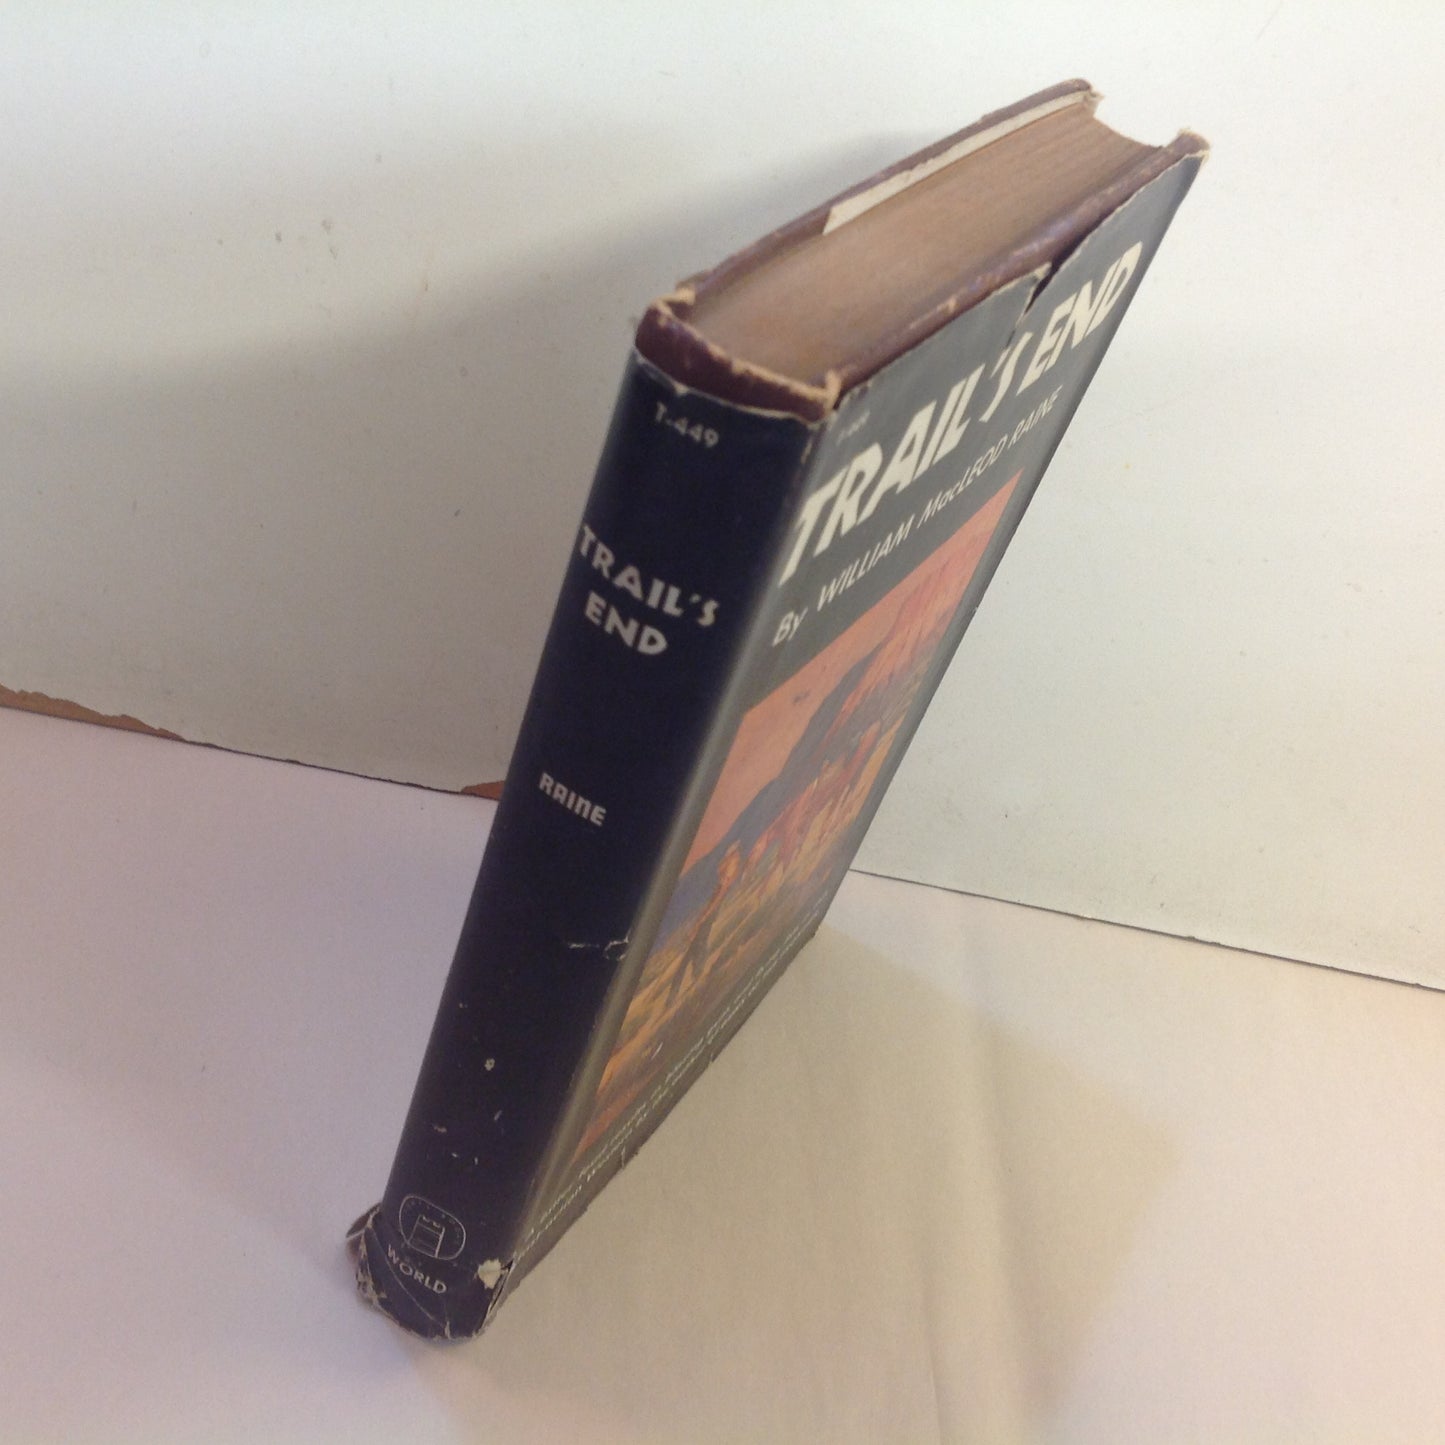 Vintage 1947 Hardcover Trail's End William MacLeod Raine Tower Books First Edition